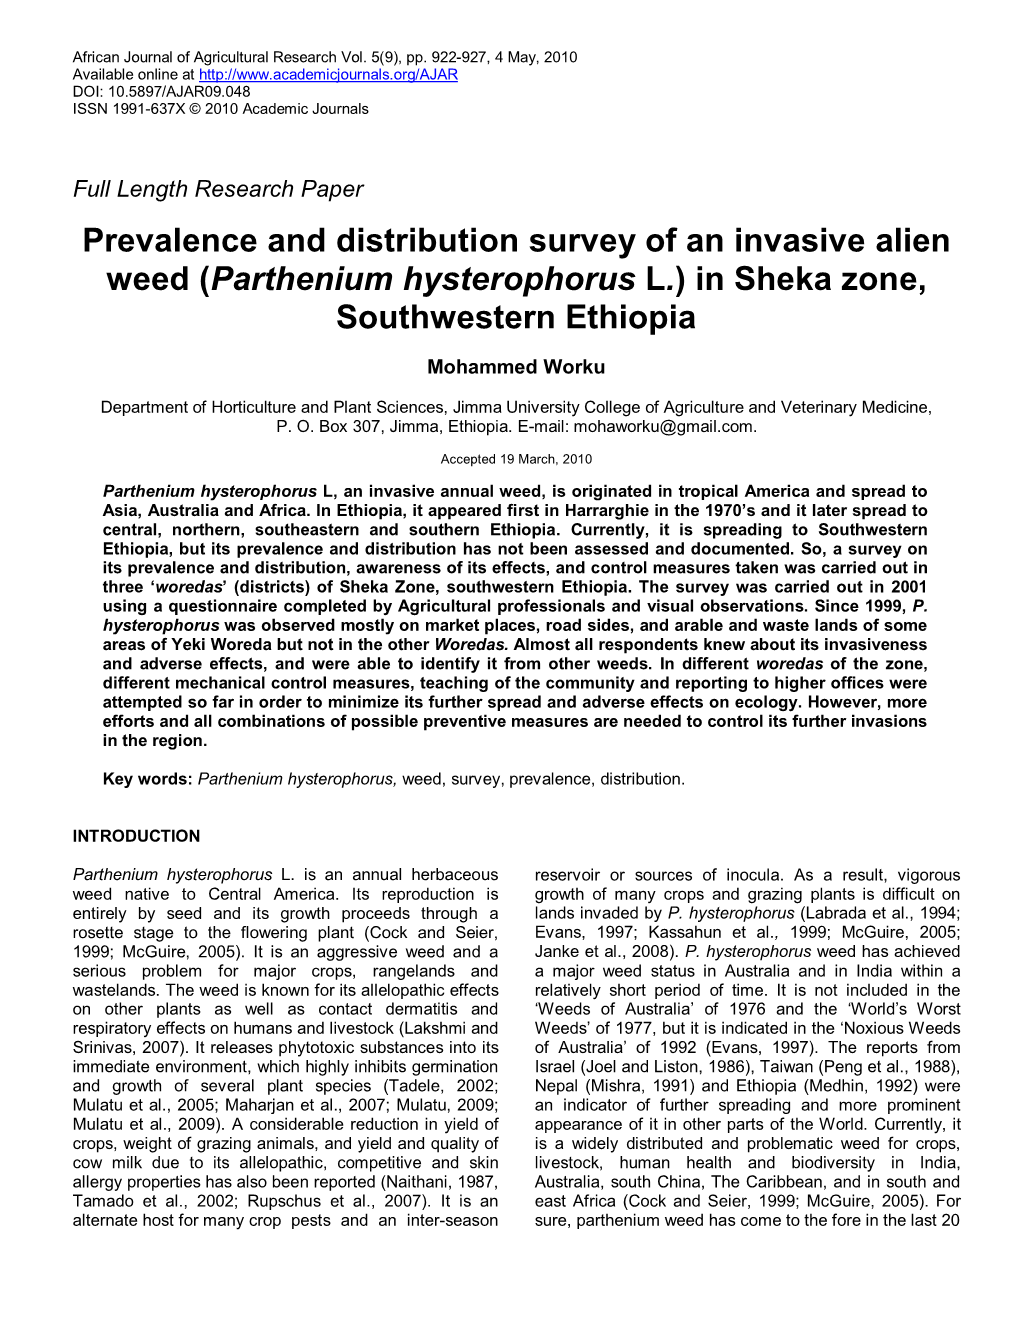 Preliminary Survey of Parthenium Hysterophorus Weed: Its Prevalence and Distribution in Sheka Zone, Southwestern Ethiopia